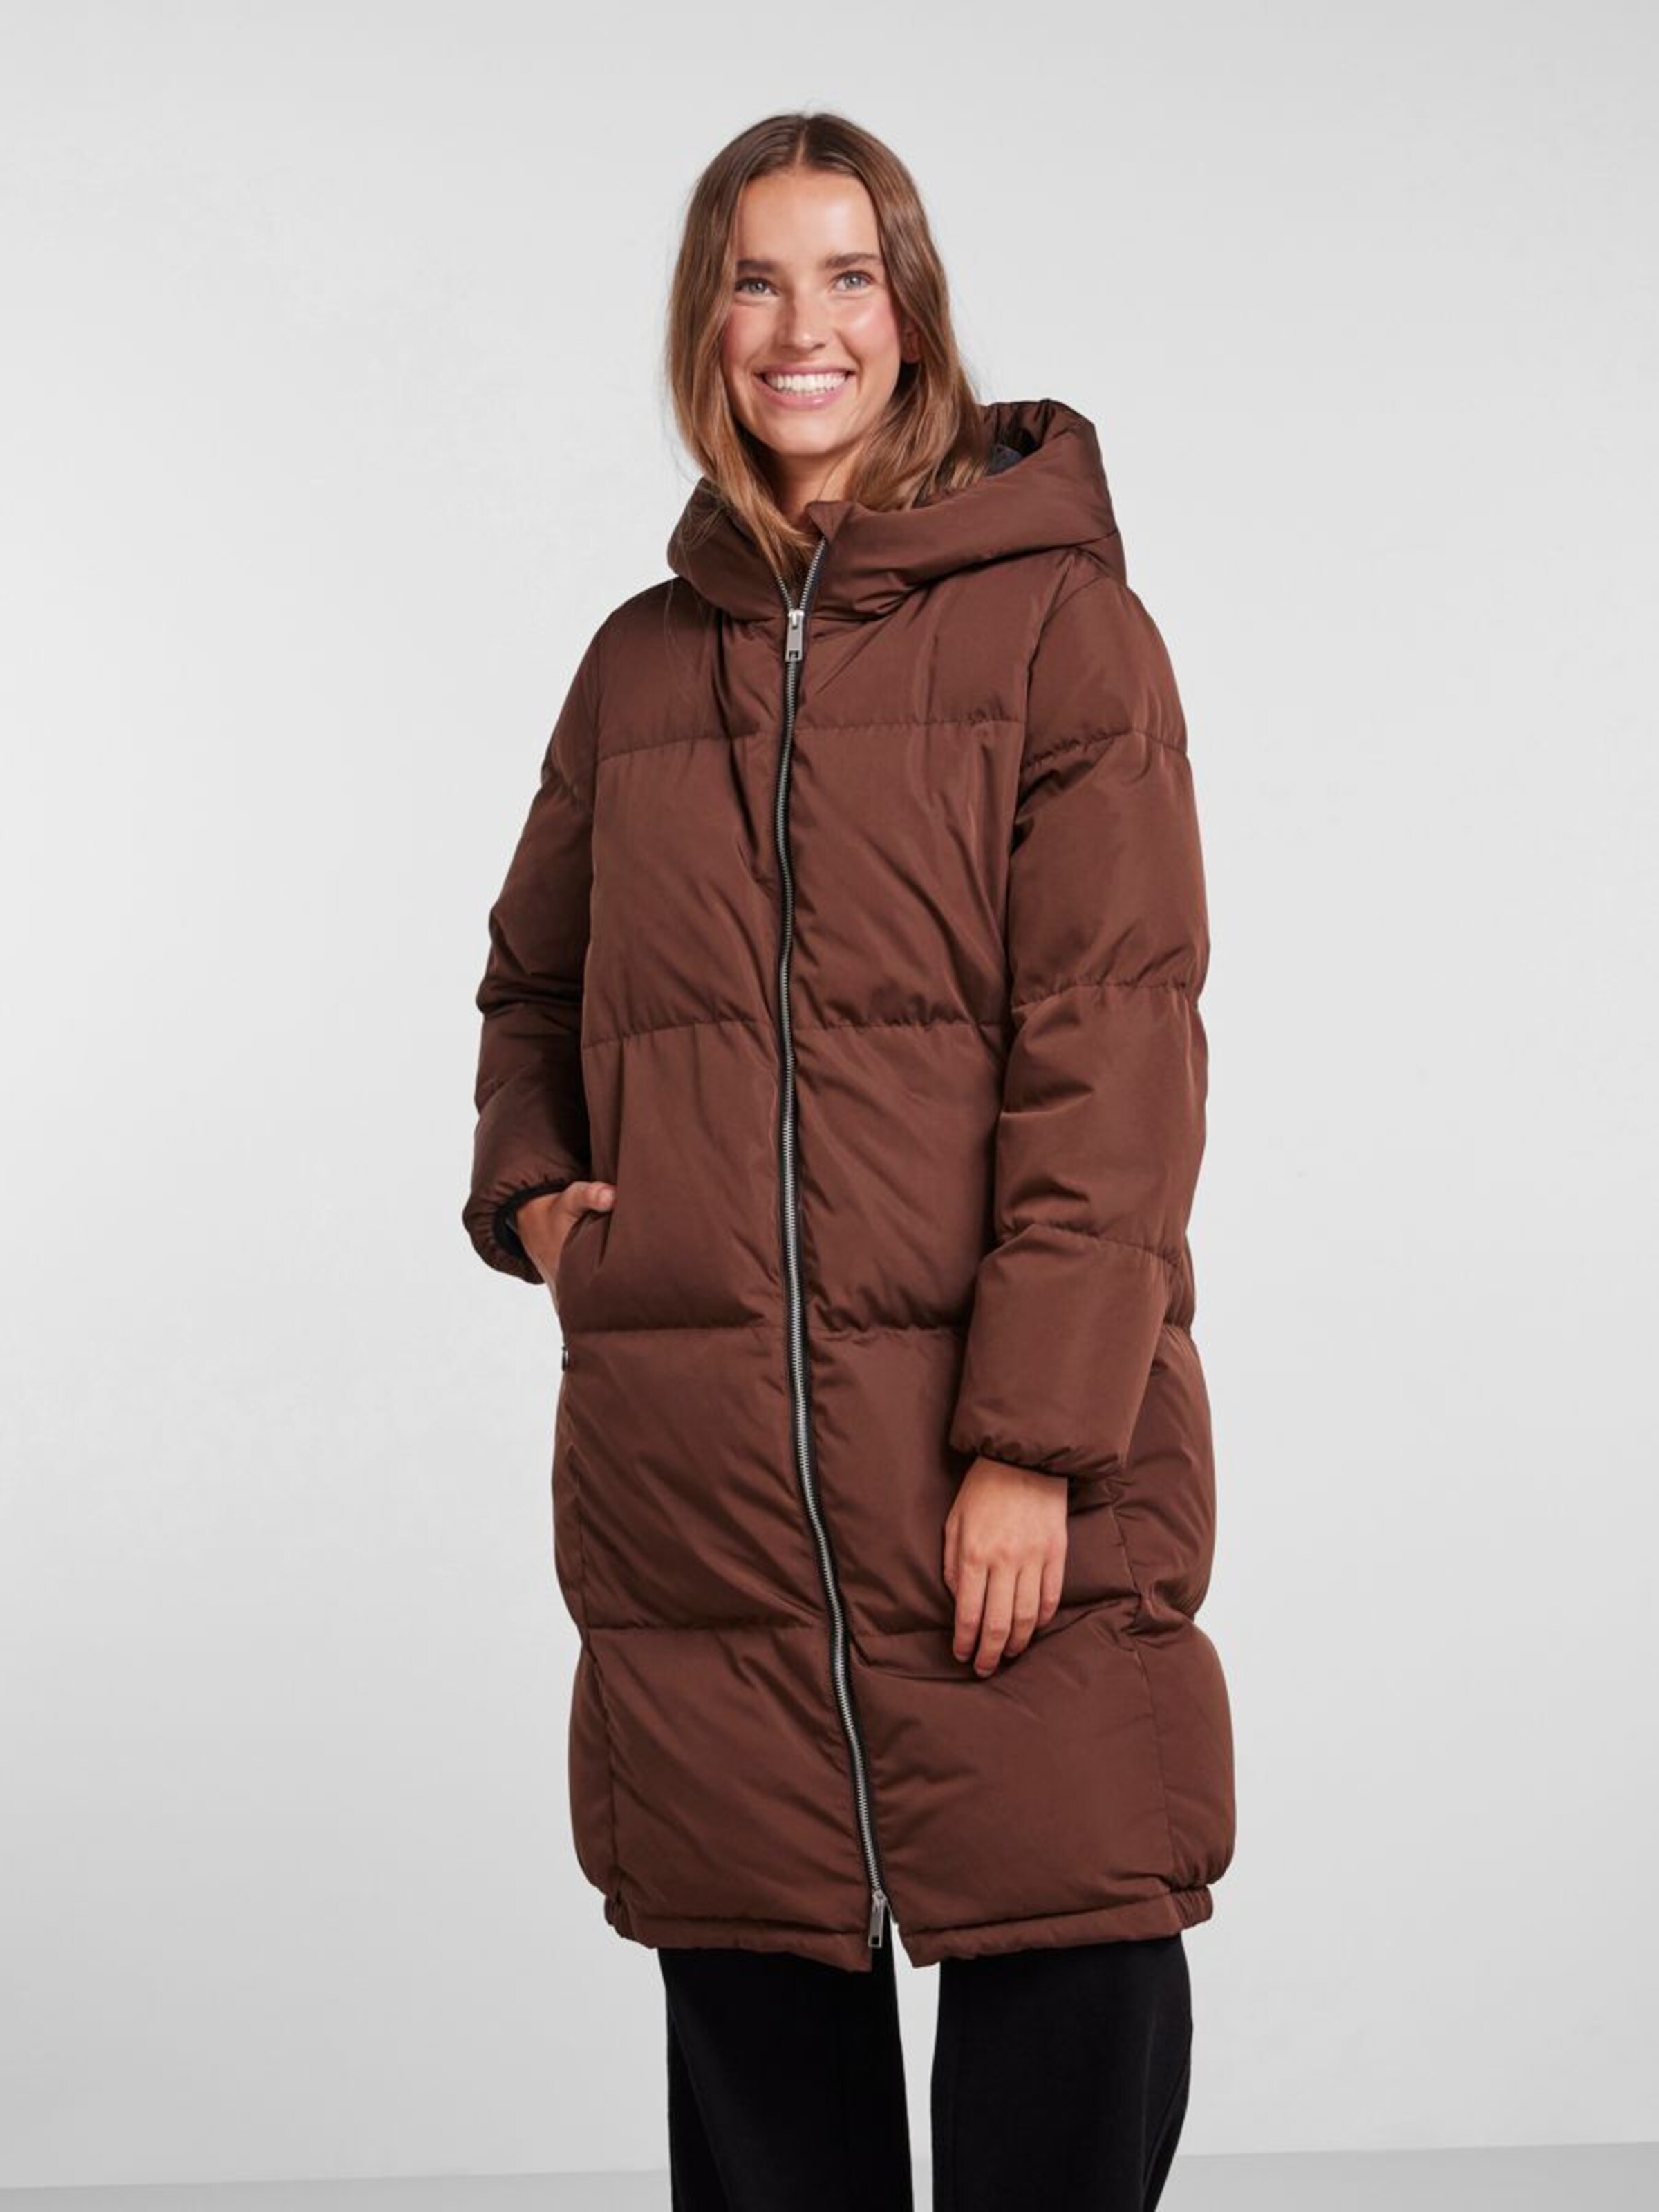 Manteau d’hiver Milly ABOUT YOU Femme Vêtements Manteaux & Vestes Manteaux Manteaux dhiver 